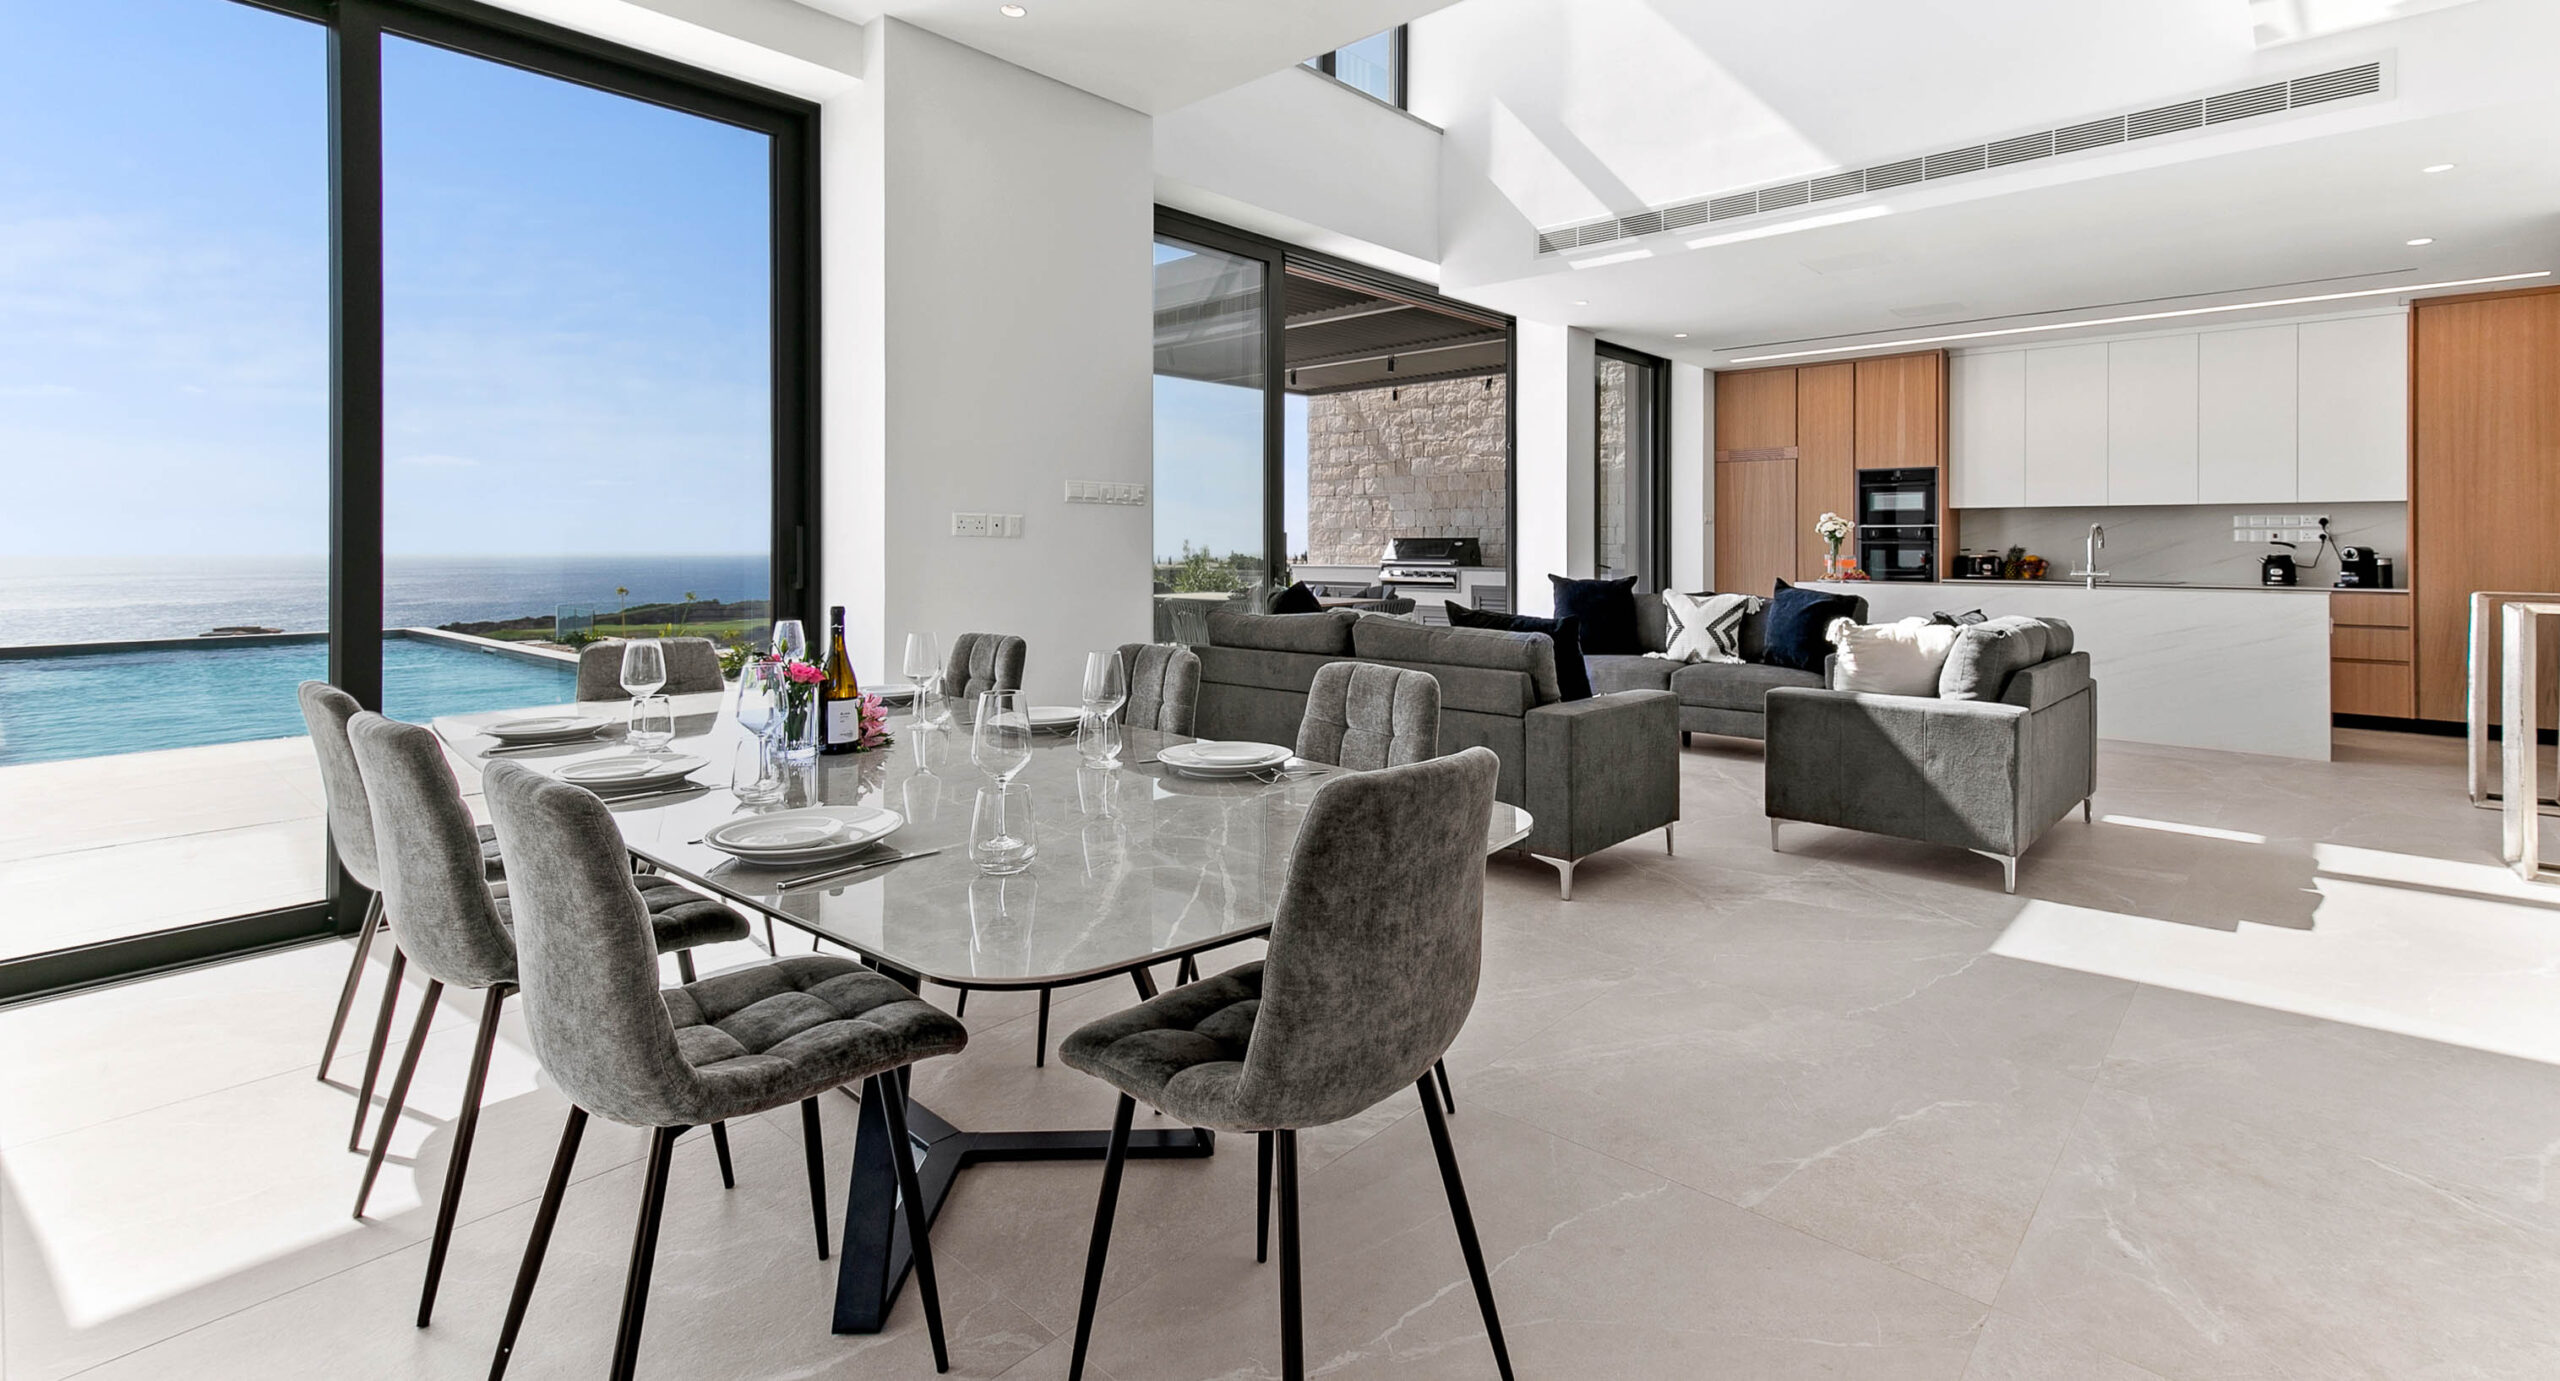 Photo of Villa 286 on Aphrodite Hills - dining room and living room and kitchen, overlooking pool and terrace with sea views in background.